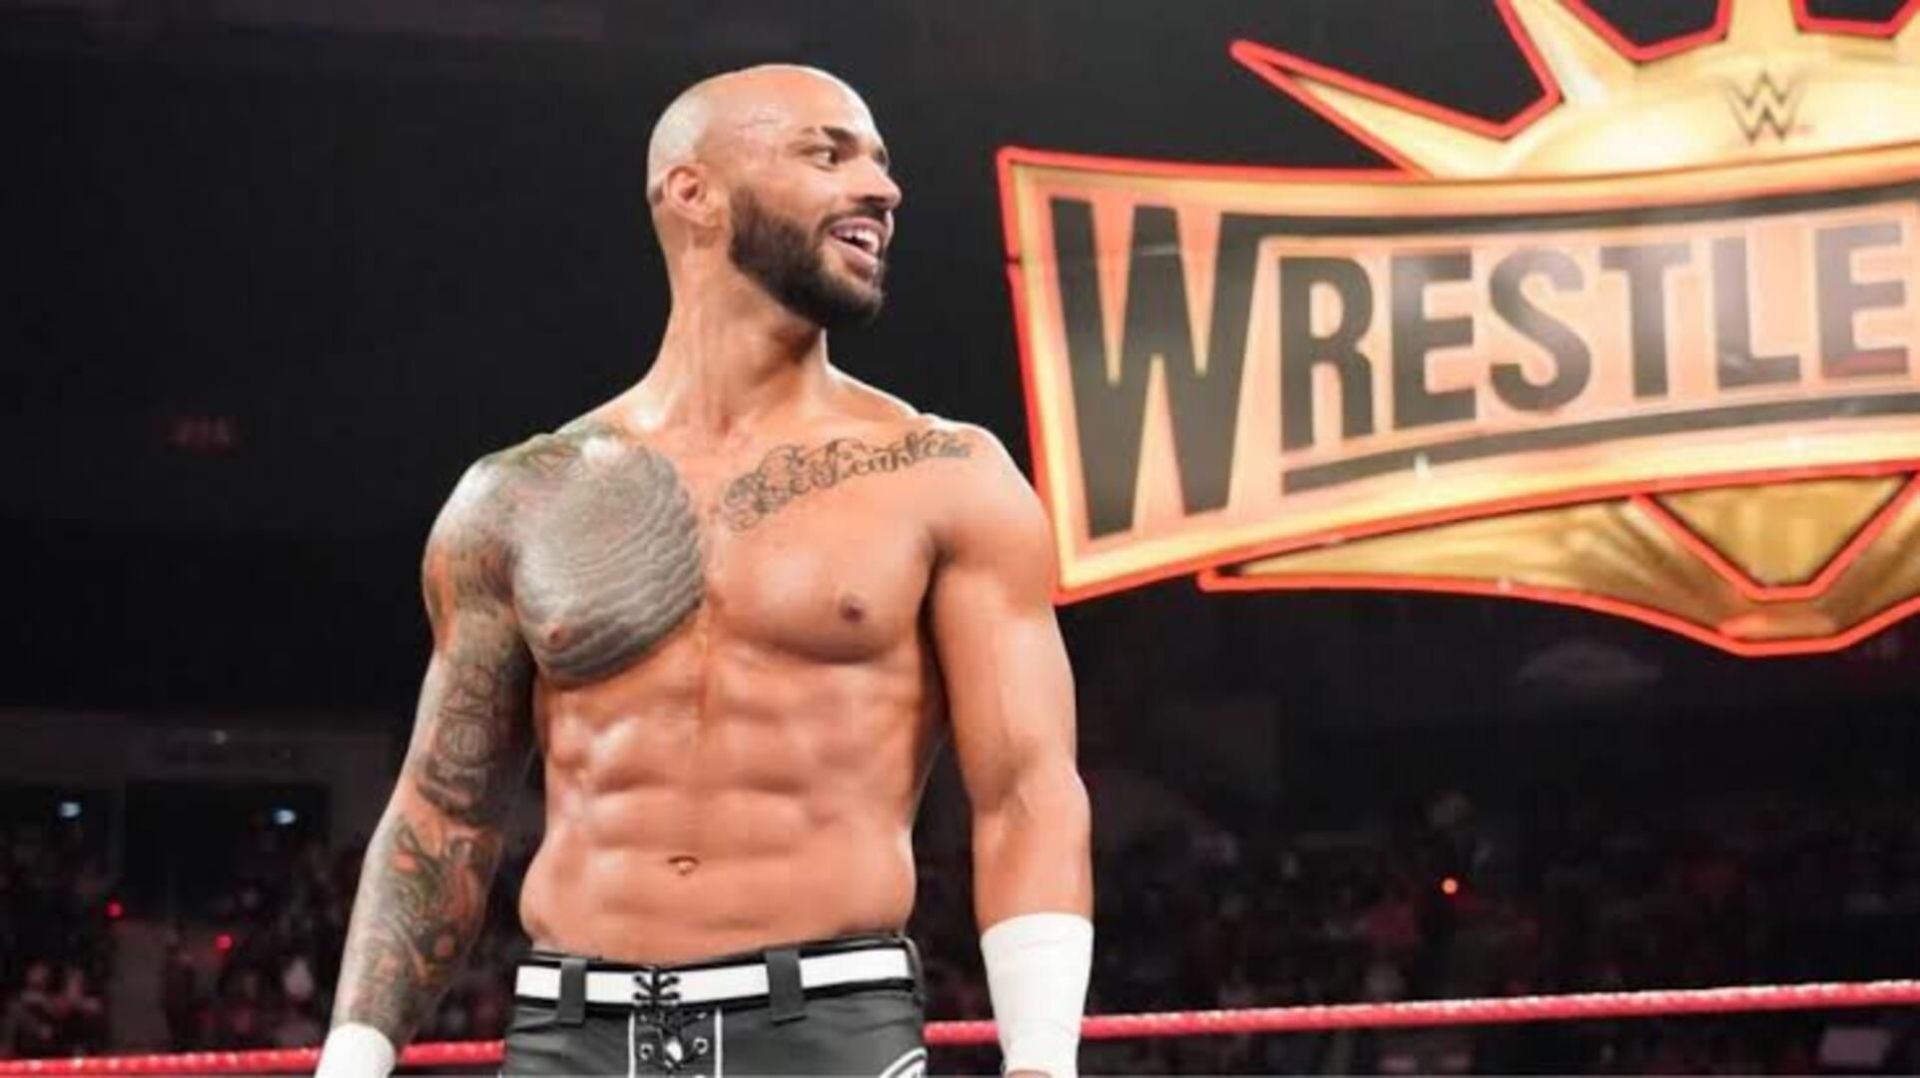 Will Ricochet be able to successfully defend his Intercontinental Championship?